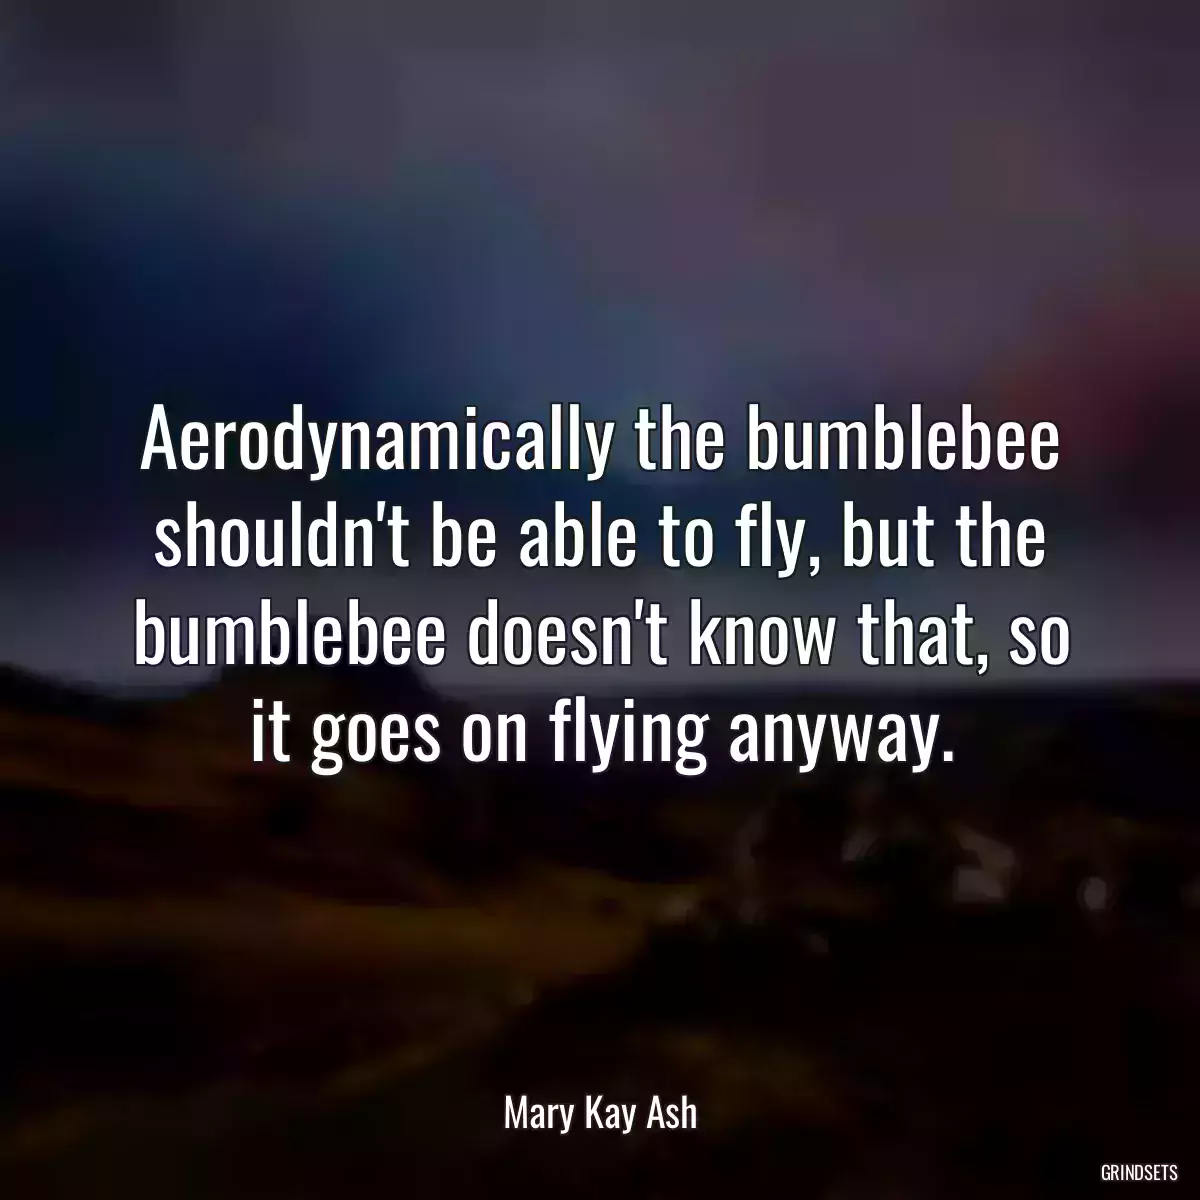 Aerodynamically the bumblebee shouldn\'t be able to fly, but the bumblebee doesn\'t know that, so it goes on flying anyway.